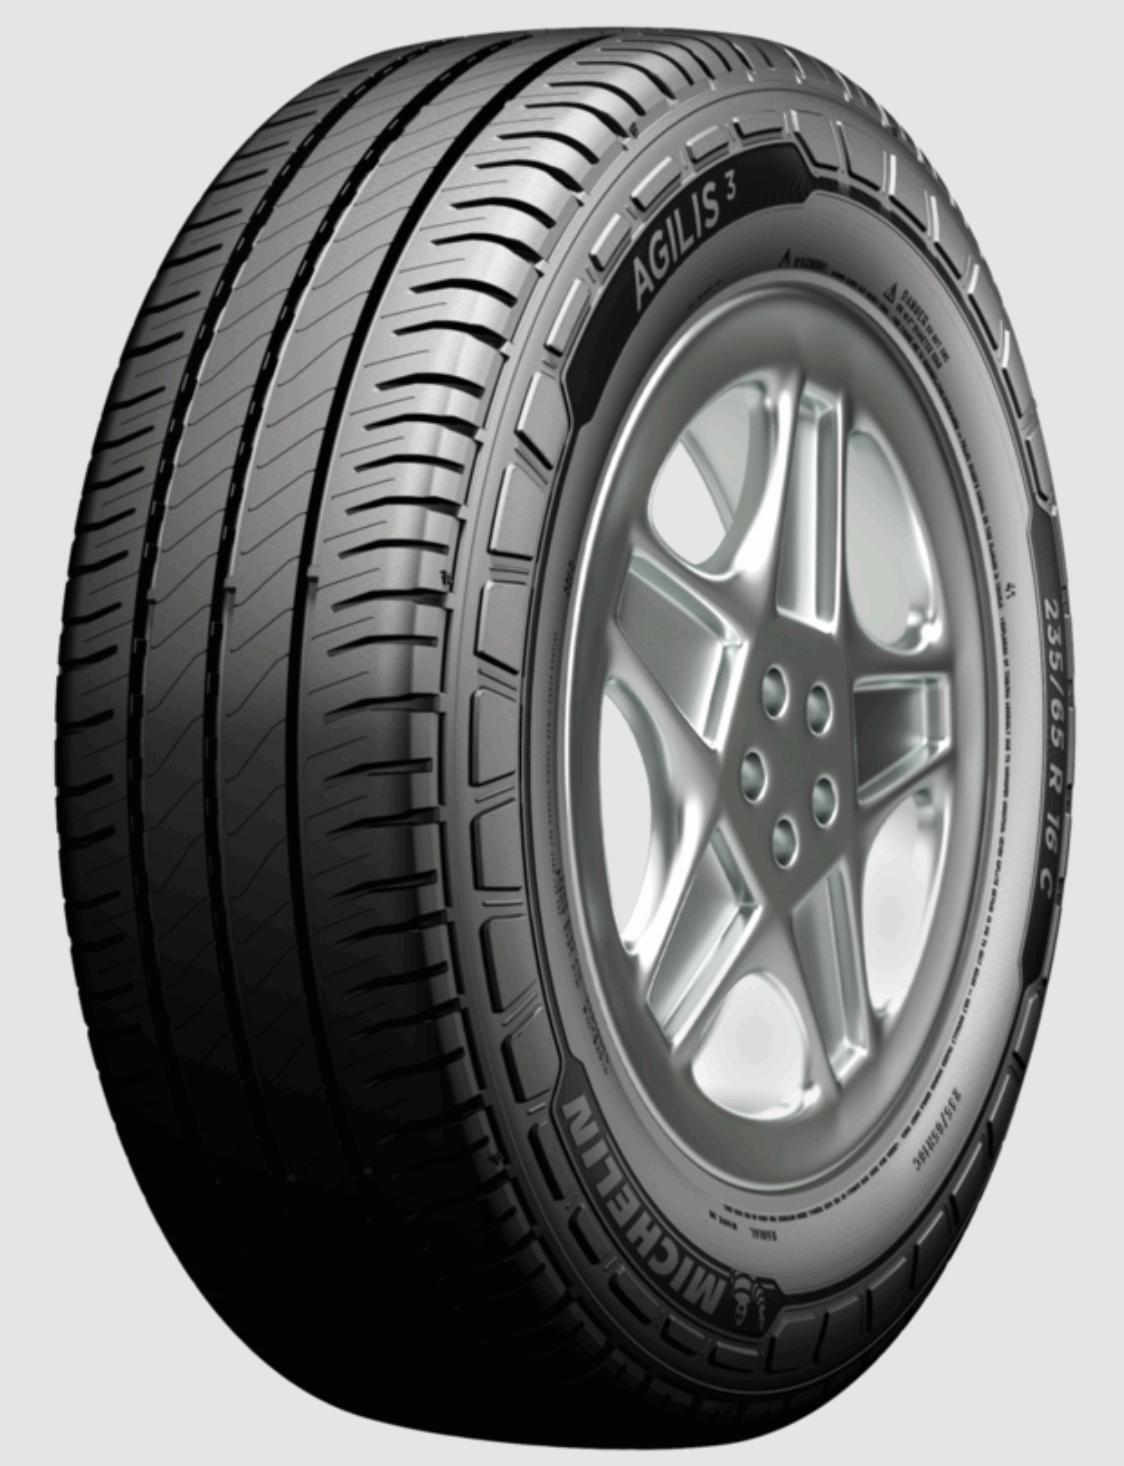 Michelin AGILIS 3 - Tyre Reviews and Tests